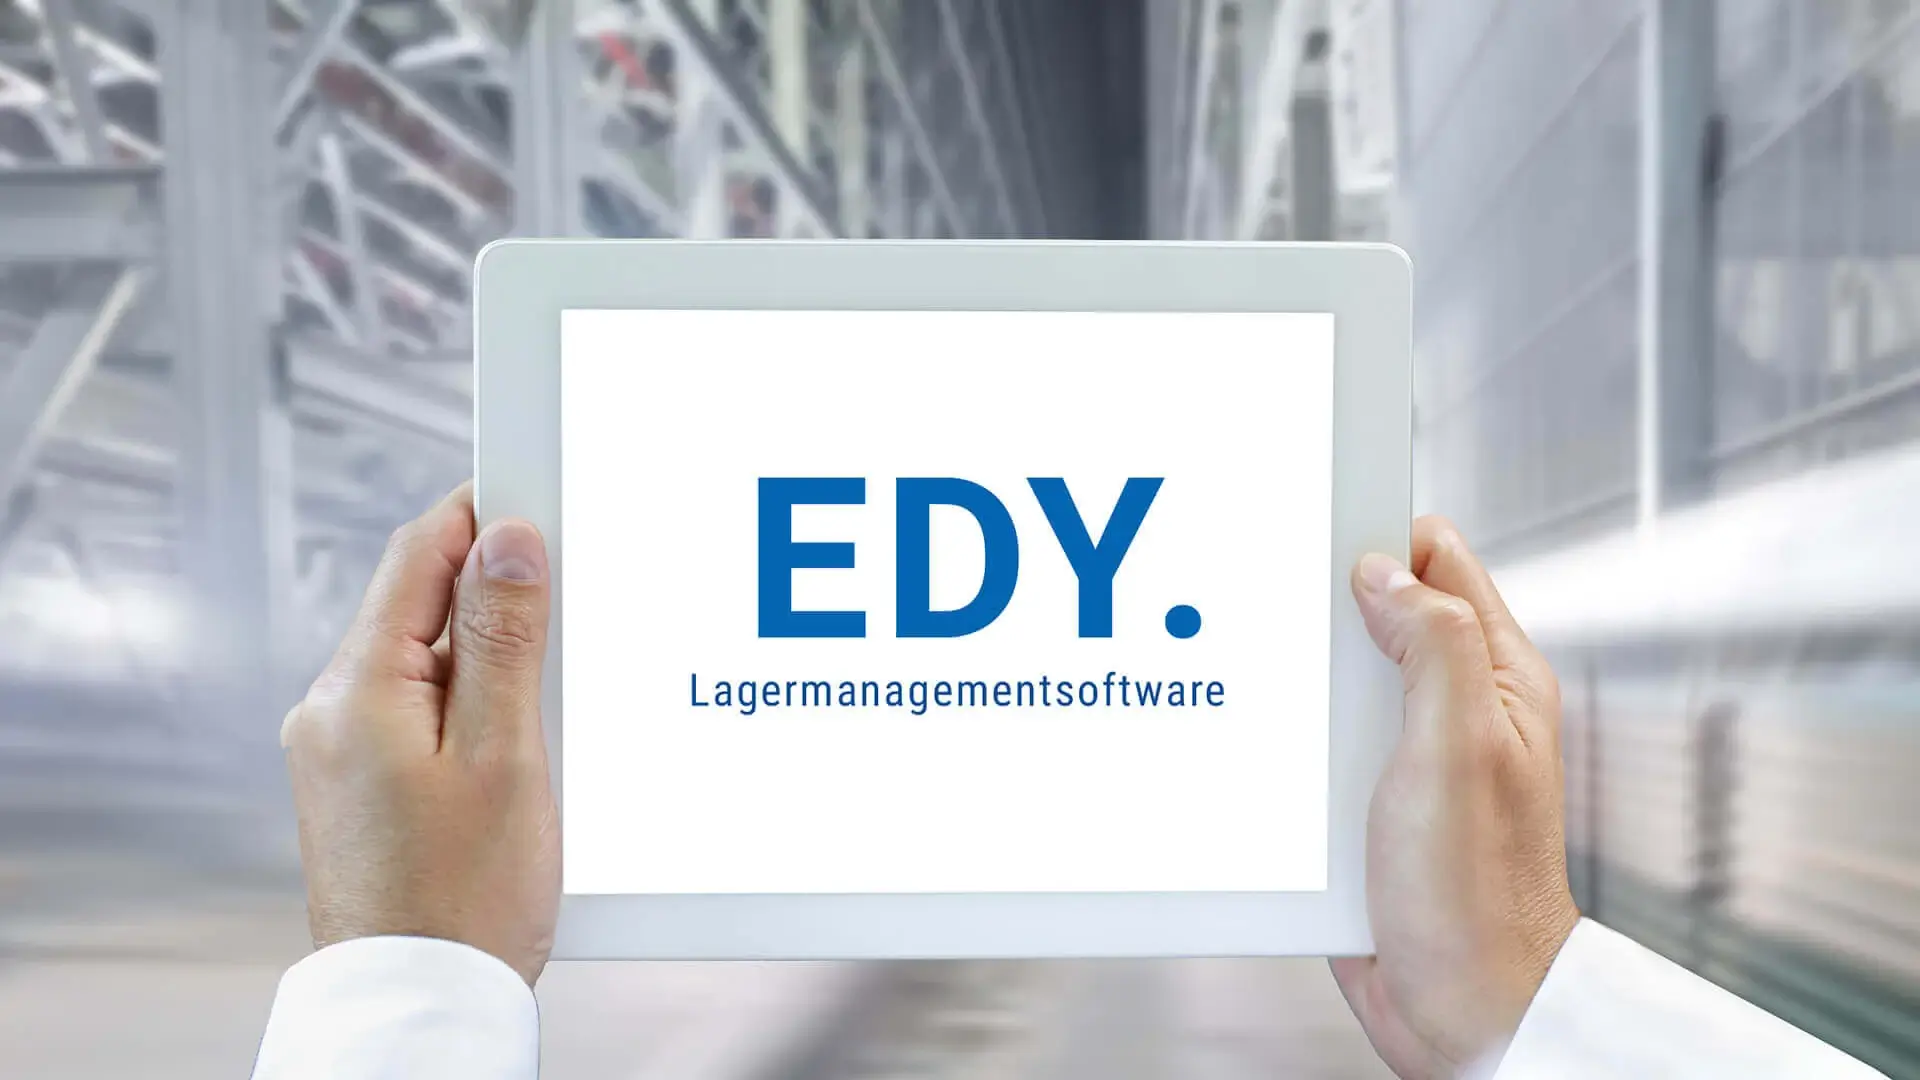 mfi-innovation-edy-material-flow-and-storage-management-software-demo-picture